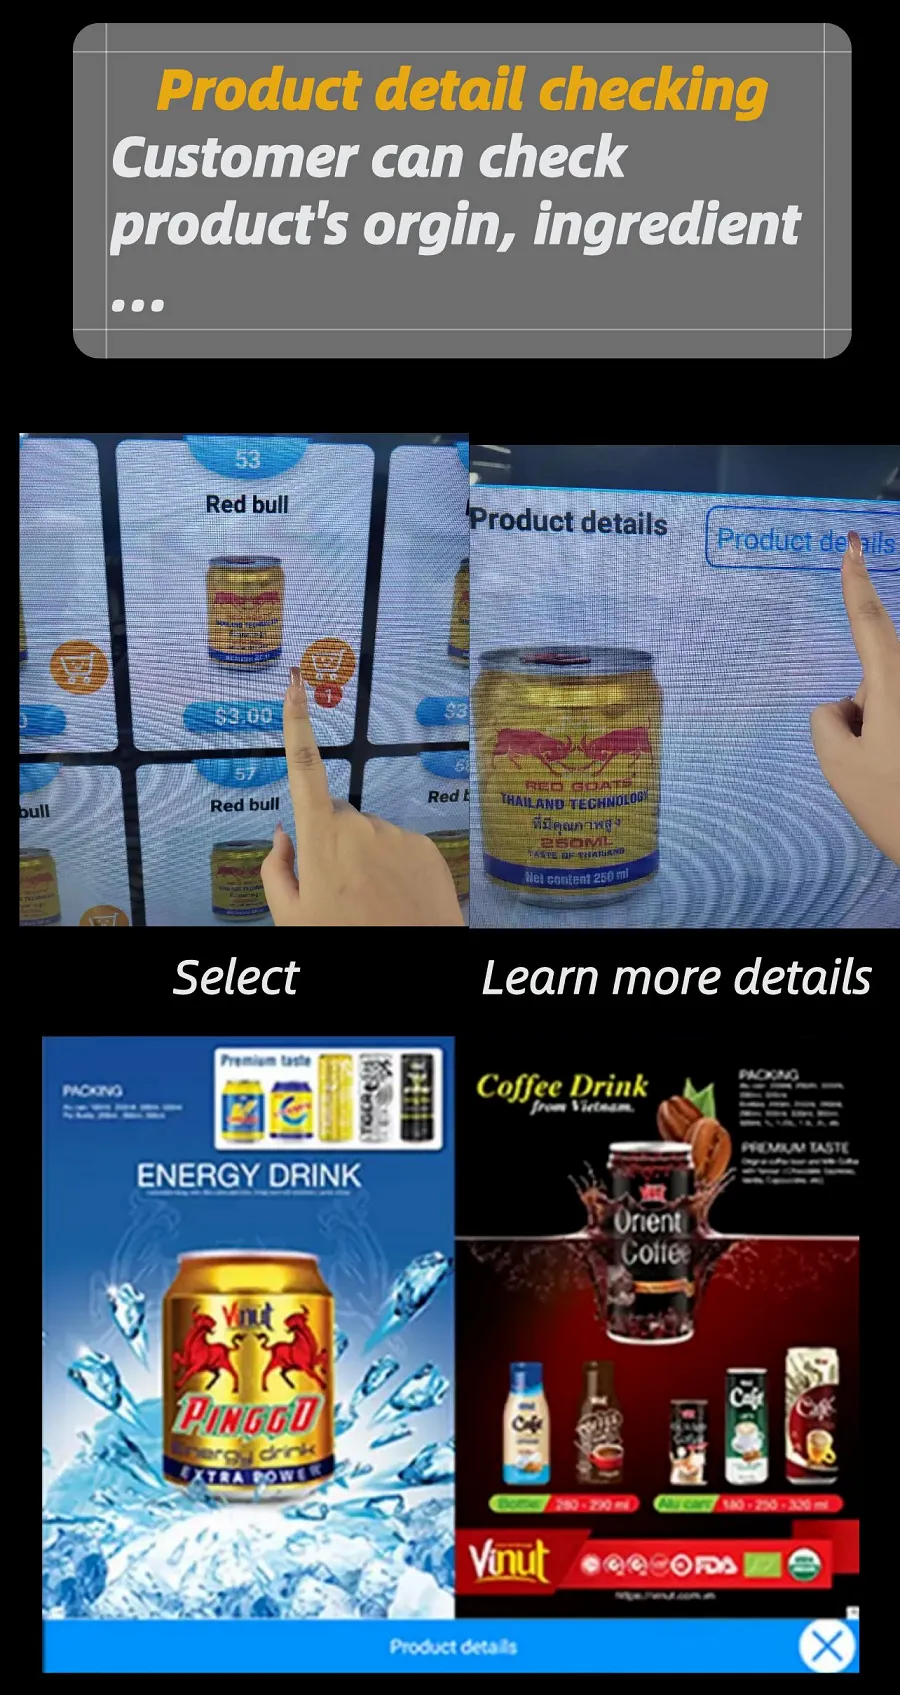 You can check products detail on the screen, orgin, ingredient, flavor... get all the details